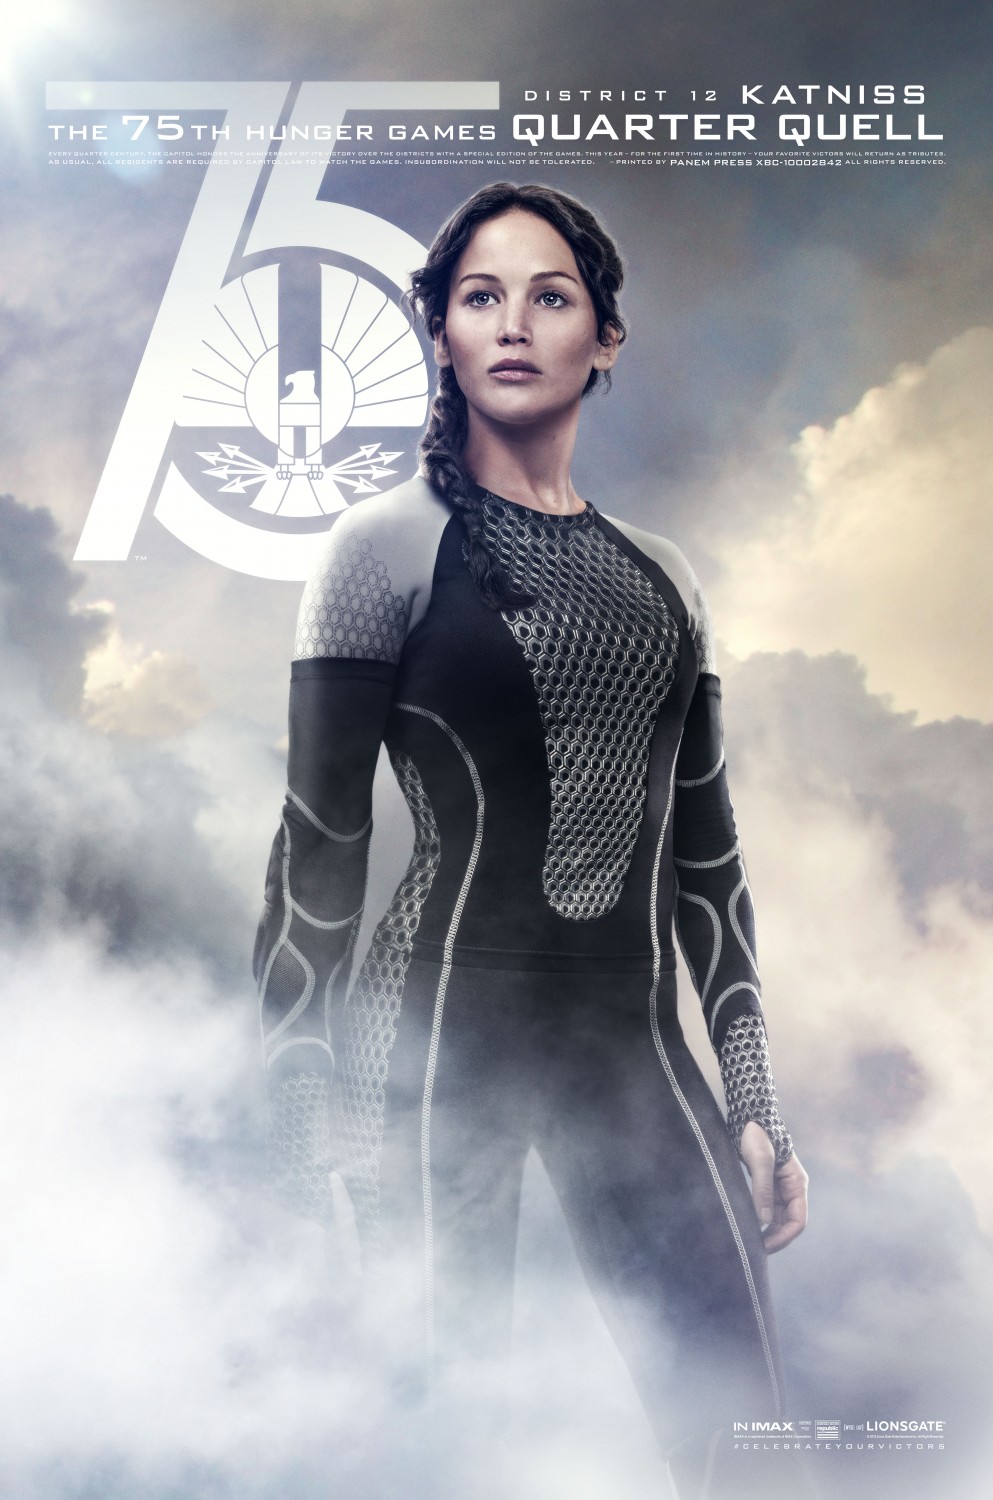 UK Tributes: Watch 'The Hunger Games' on Lionsgate LIVE - A Free Night At  The Movies! - The Hunger Games News - Panem Propaganda